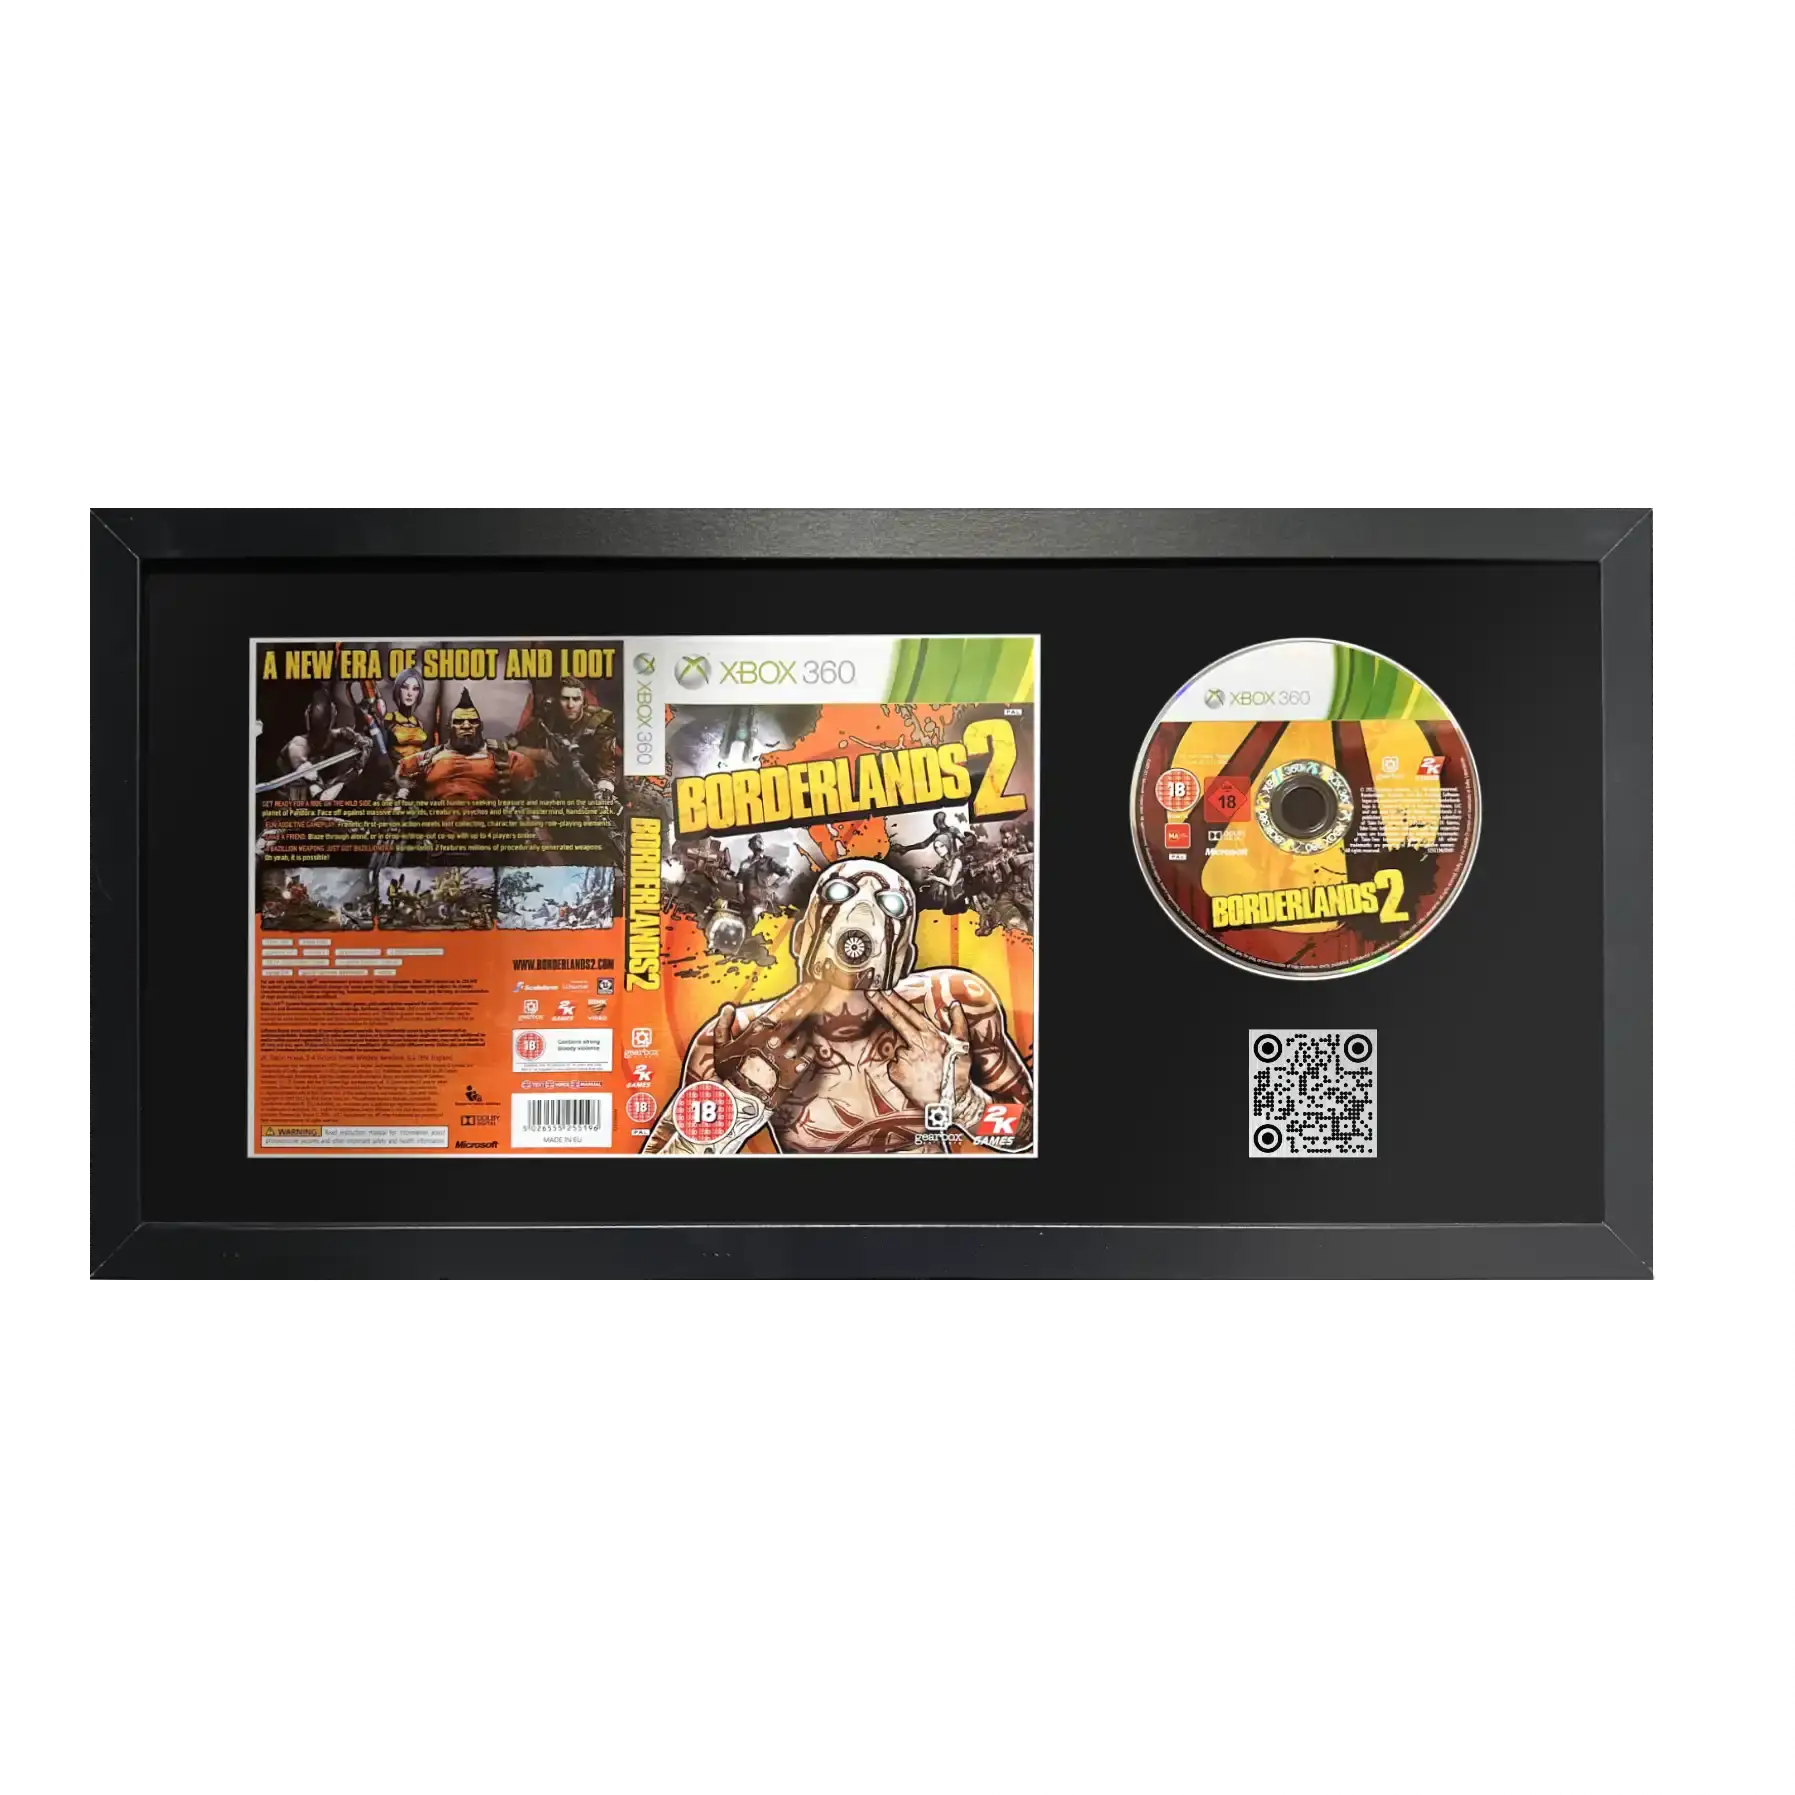 Borderlands 2 for Xbox 360 in a frame with a QR code